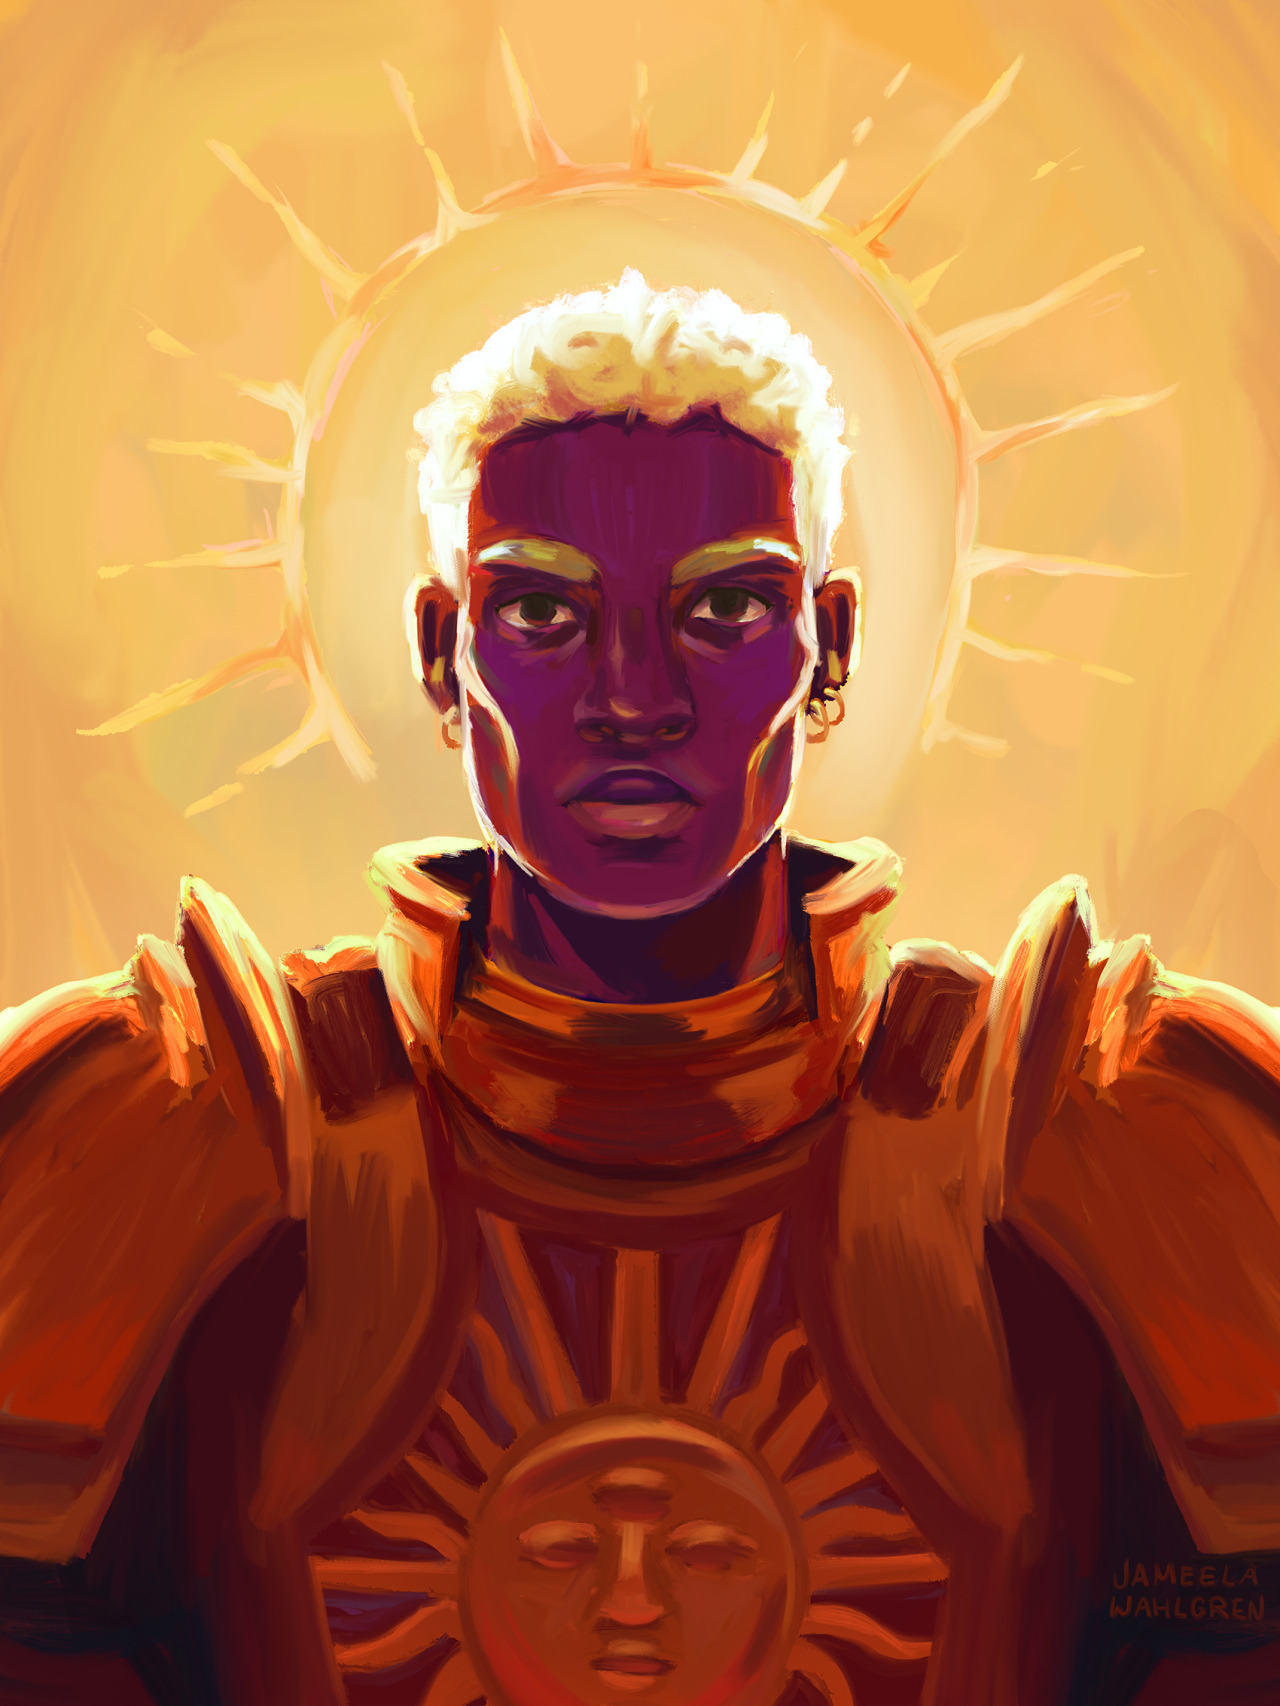 jameelaillustration:
“I’m really rusty on realism but I’ve been reading NK Jemisin’s Inheritance Trilogy and I just HAD to paint Bright Itempas (the way I think Oree might)
”